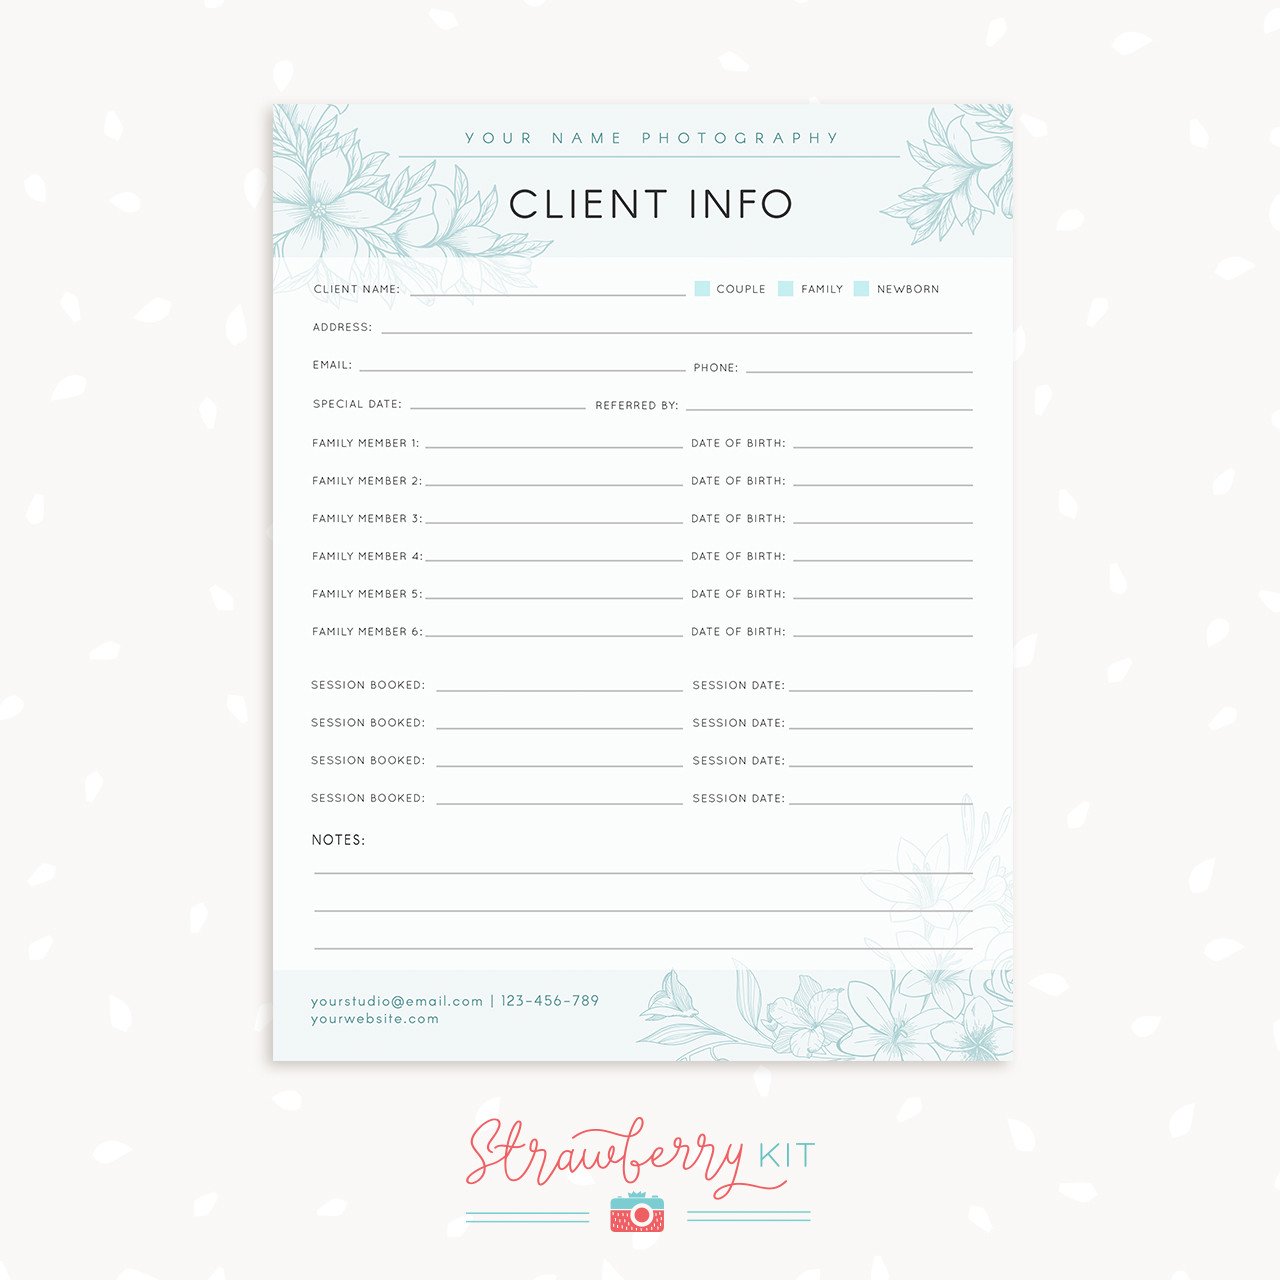 Photography Client Questionnaire Template Client Information Template for Graphers Strawberry Kit